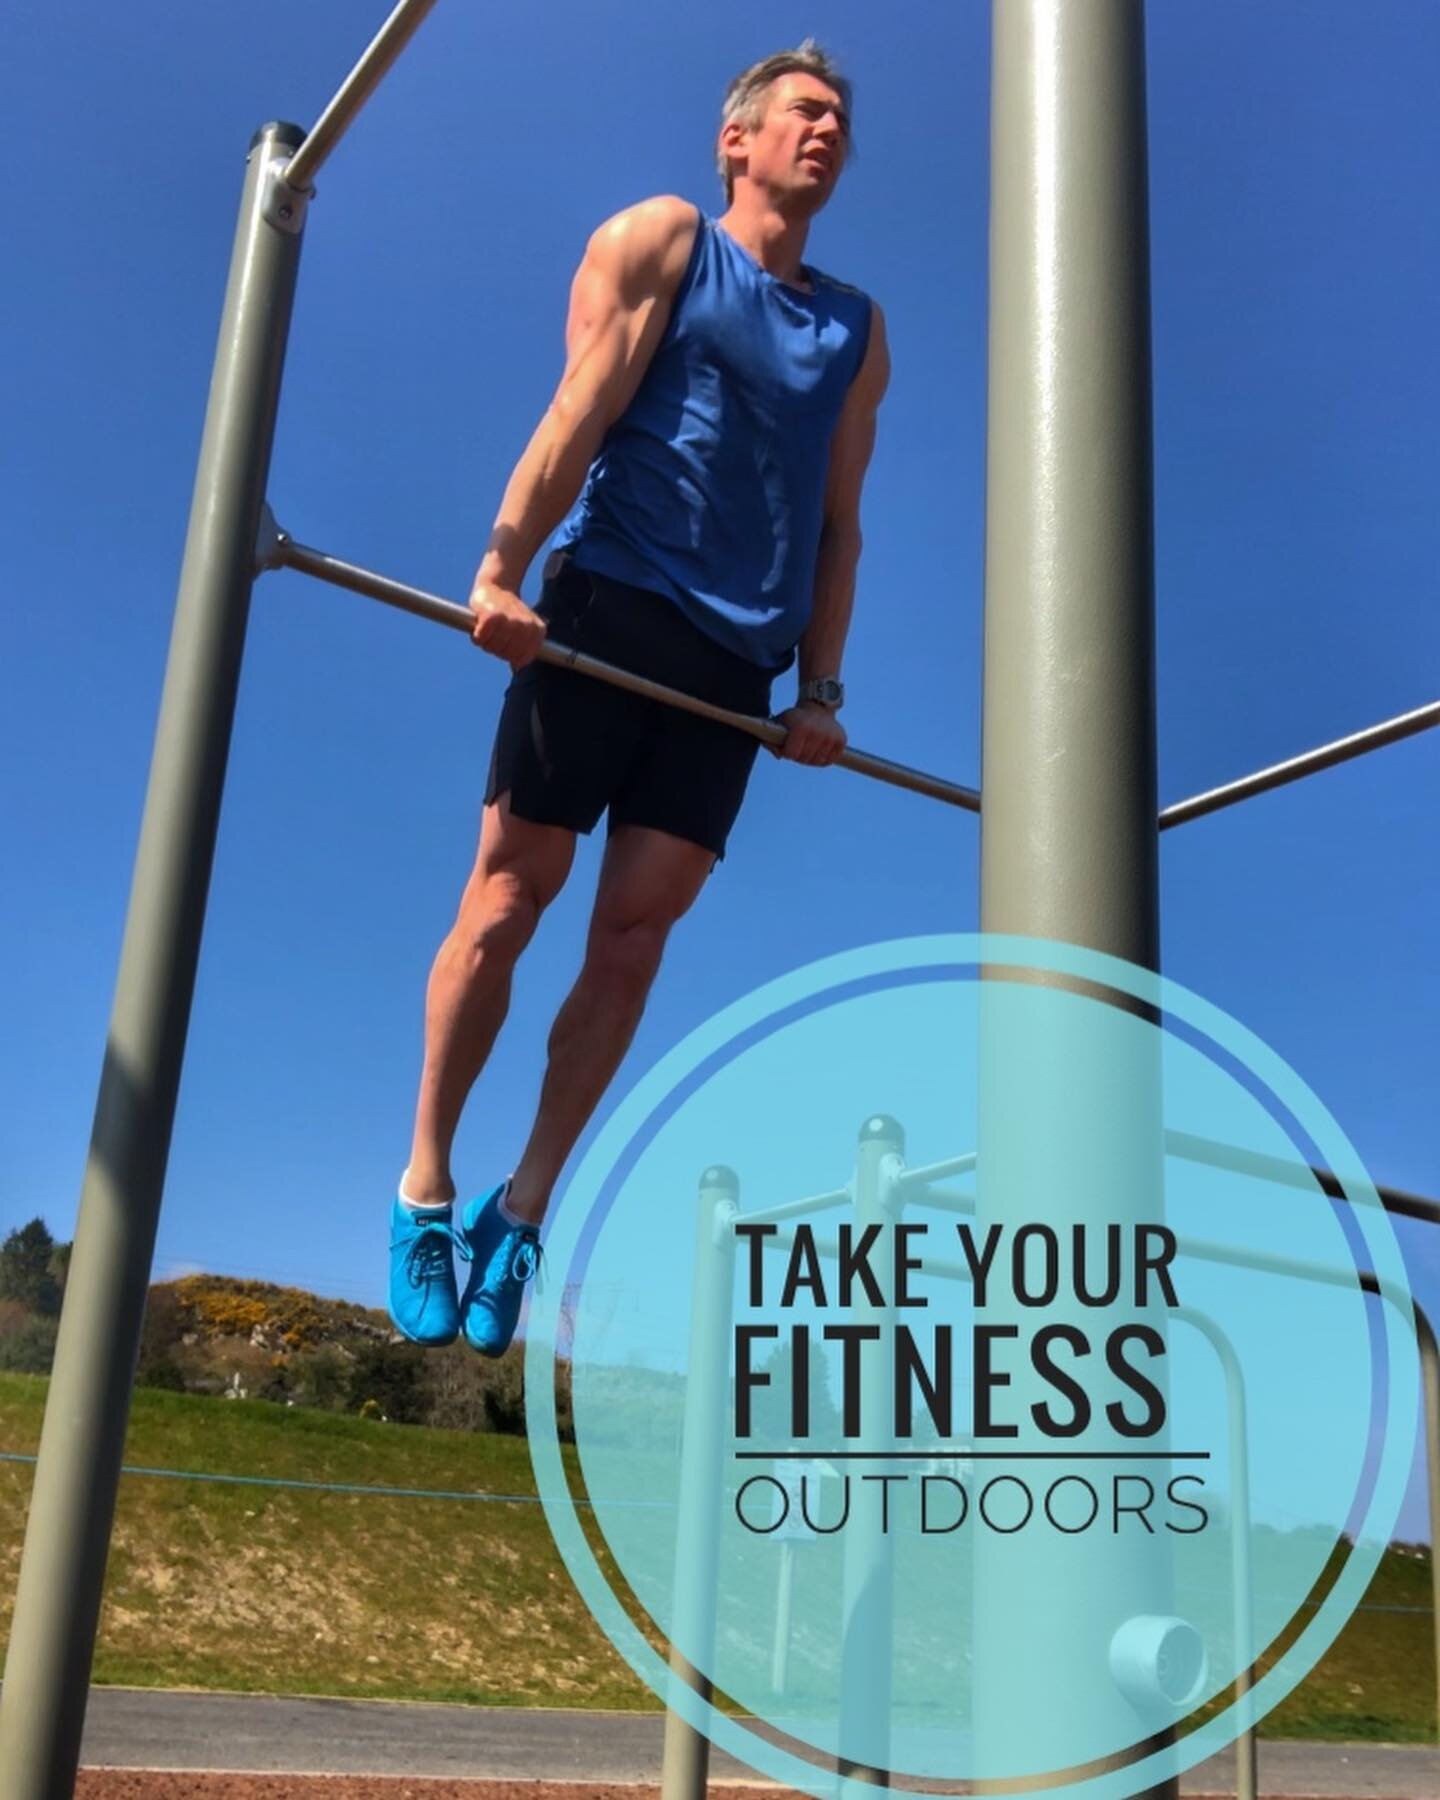 Whenever you can, try to get outdoors if the weather is good. 
So many great outdoor workout areas you can make use of